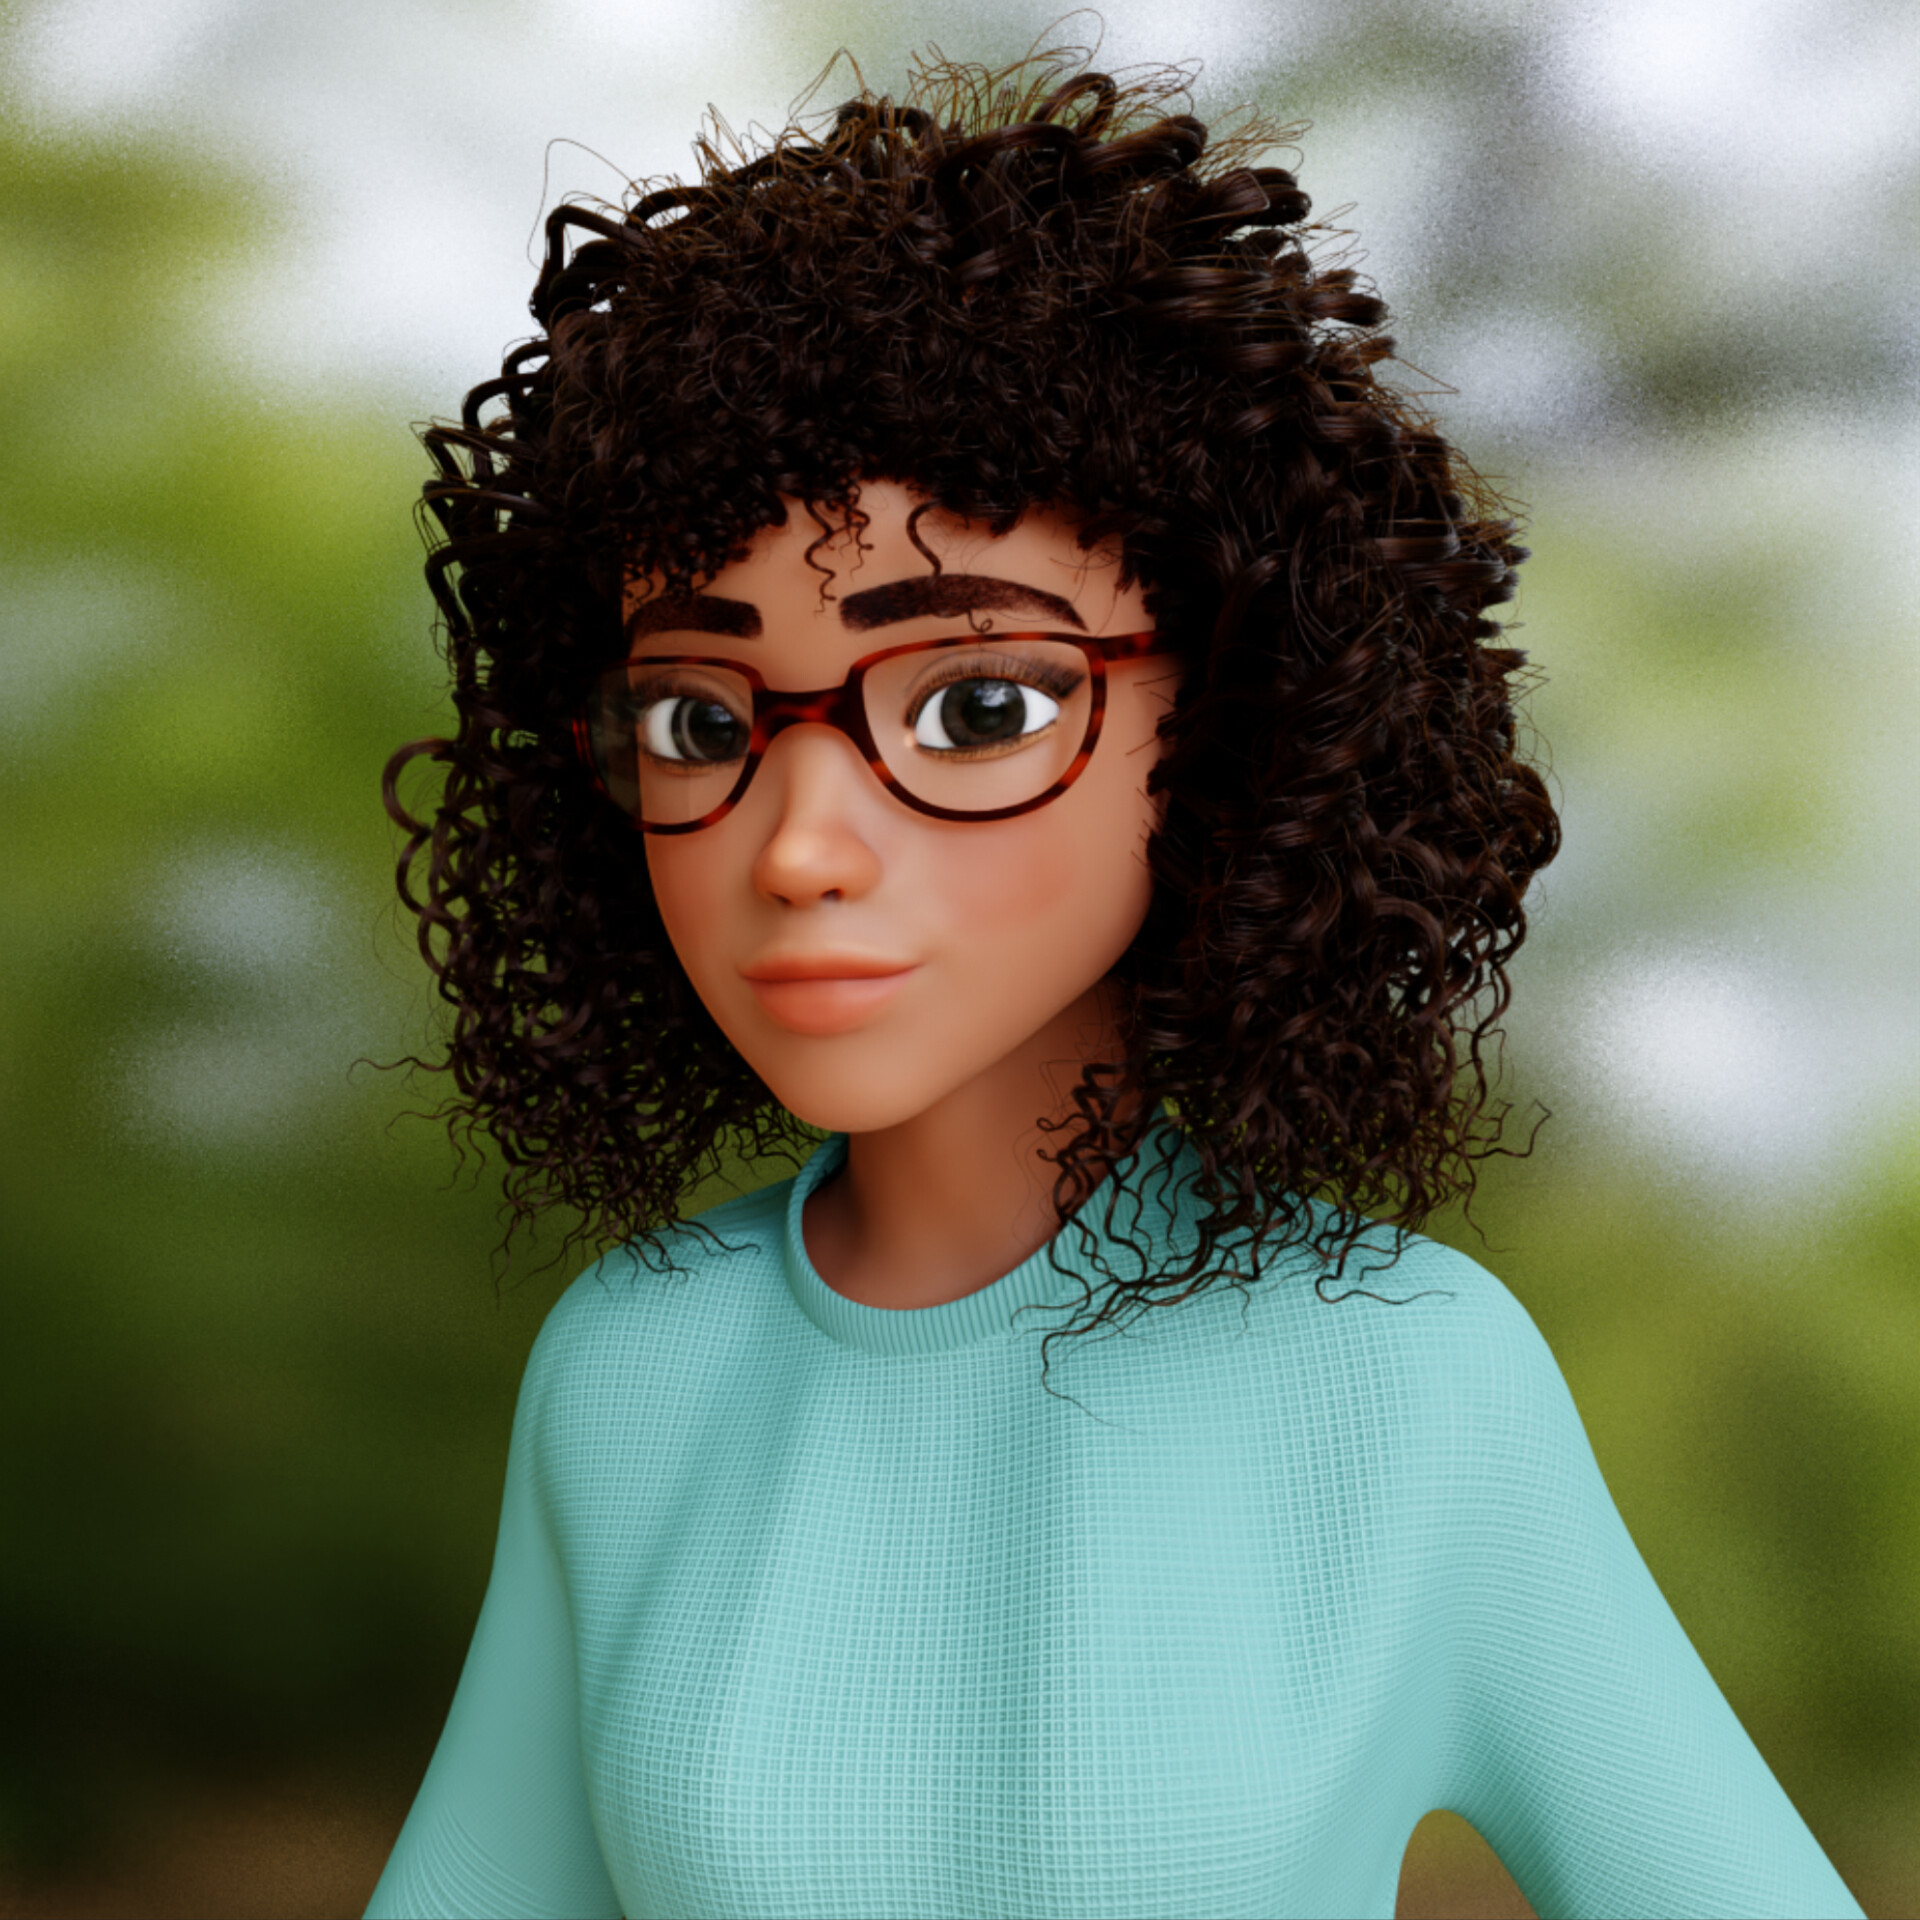 Curly girl - Finished Projects - Blender Artists Community